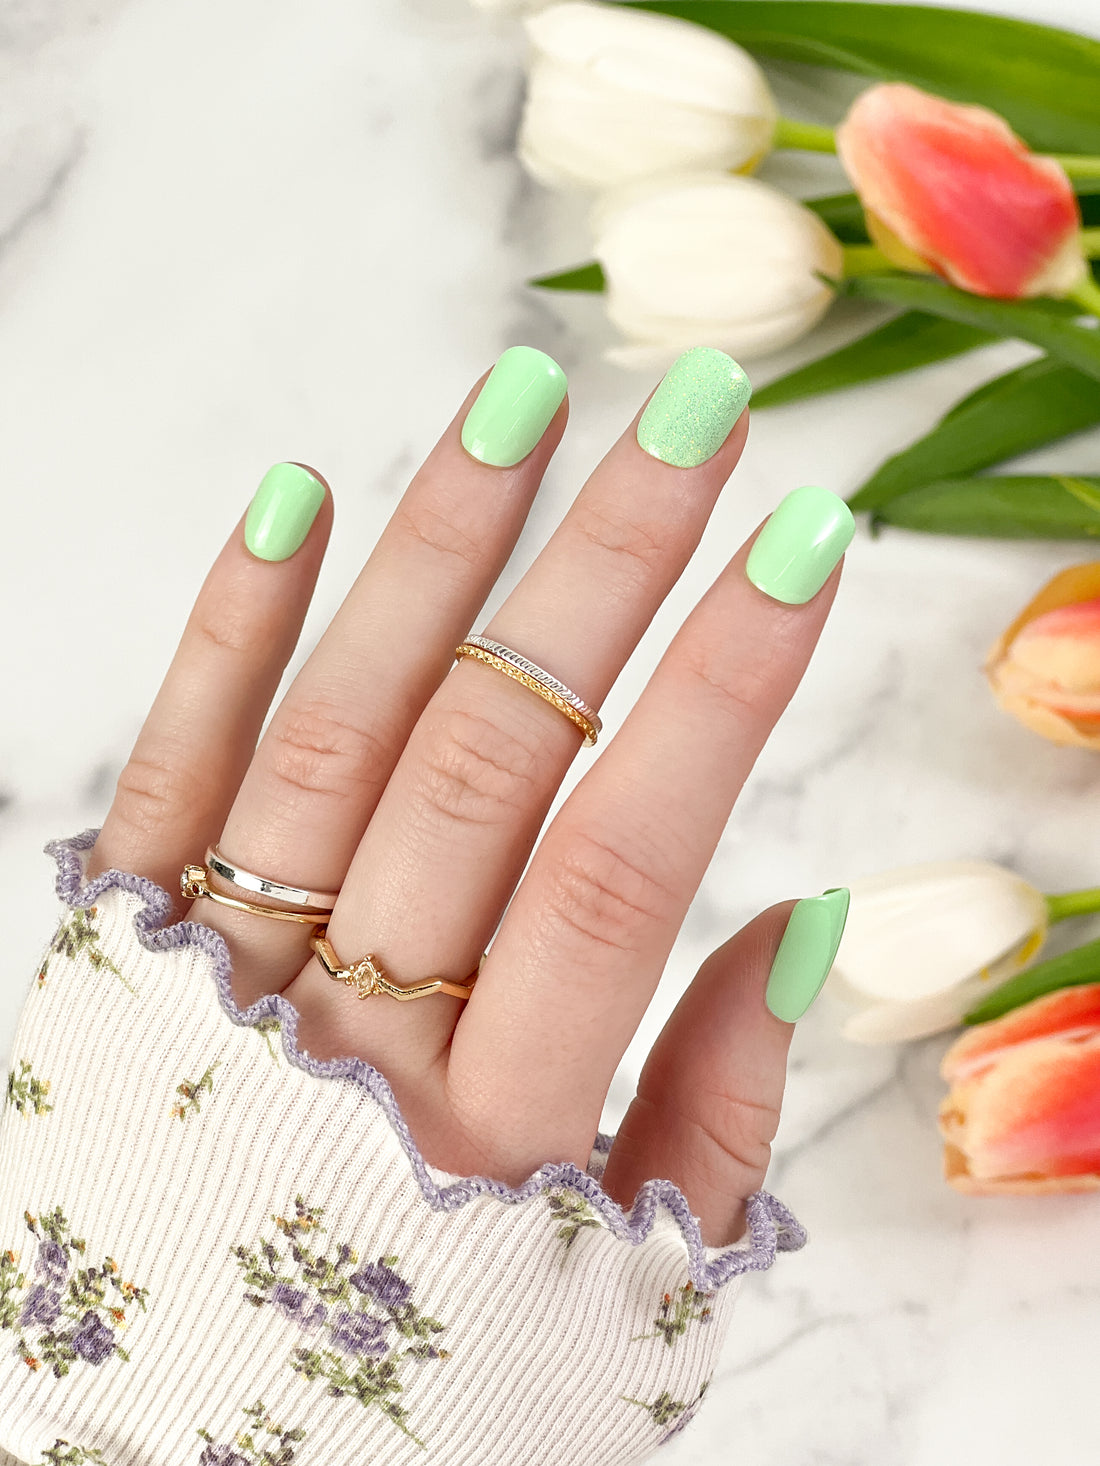 Key Lime Pie – AURORA 5-Free Nail Lacquer by Roar Nails